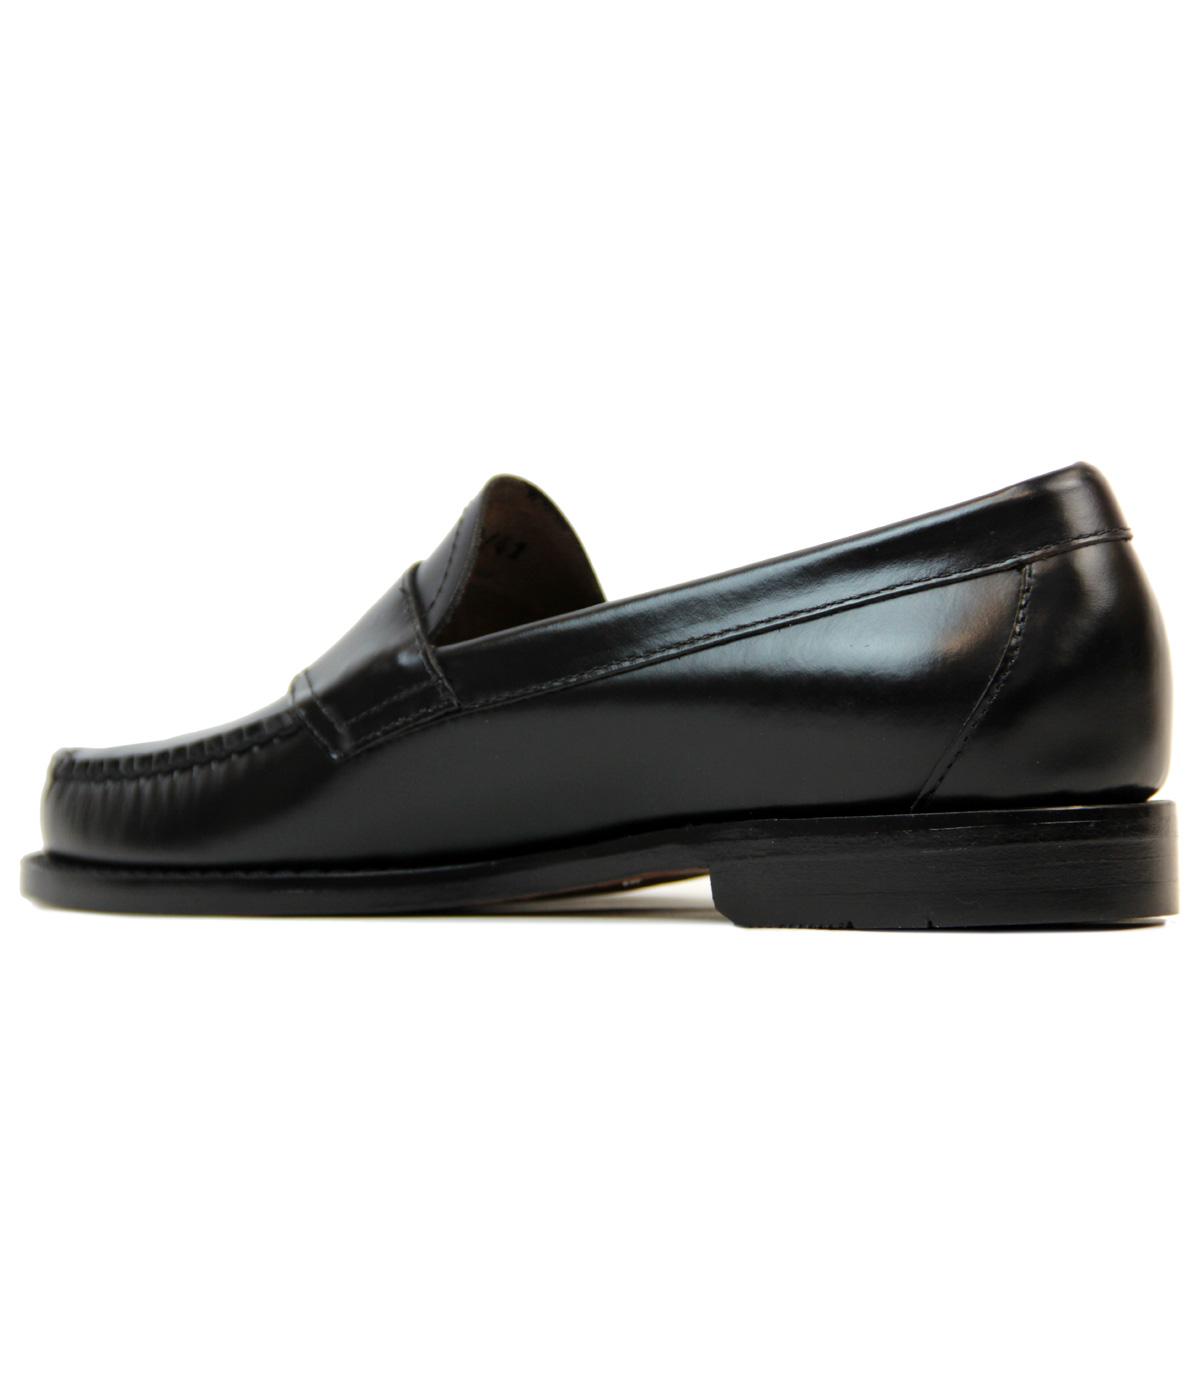 Bass Weejuns Heritage Logan Retro 60s Mod Penny Loafers in Black